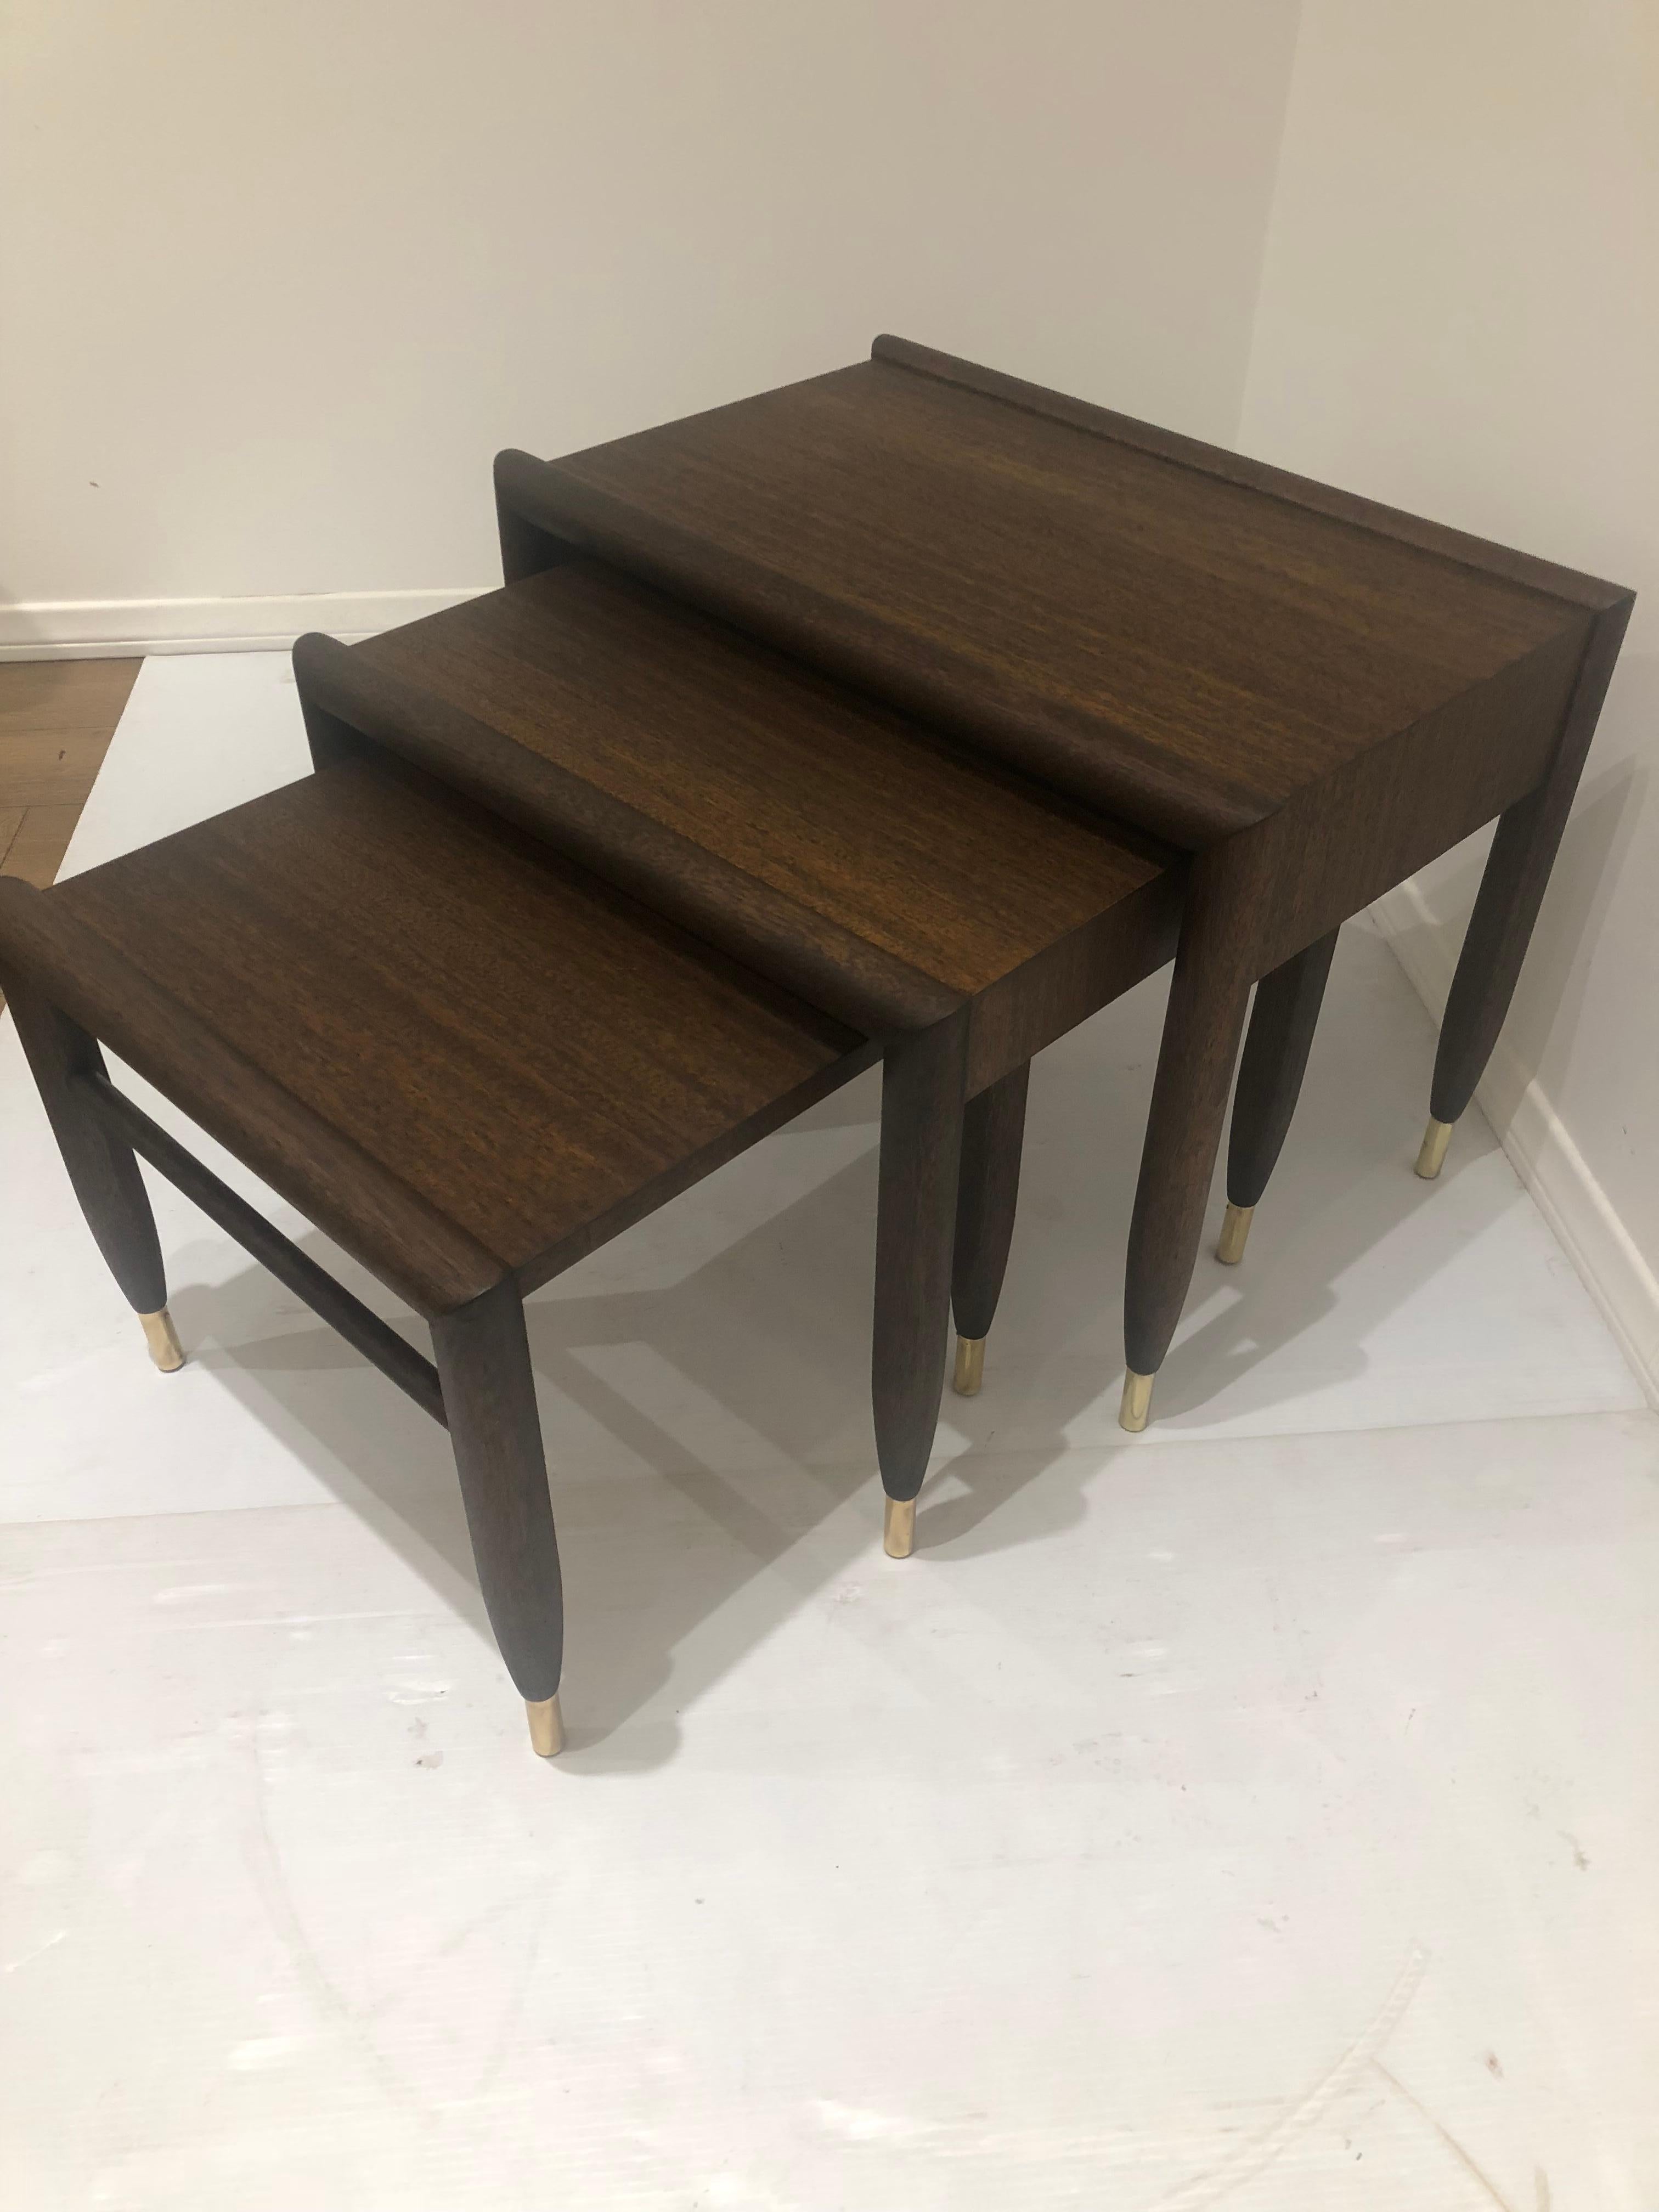 Beautiful set of three nesting tables designed by John Keal for Brown Saltman Solid mahogany, with solid polished brass tips freshly refinished in chocolate finish. Beautiful and rare set great for a Mid Century , Danish Modern California Design